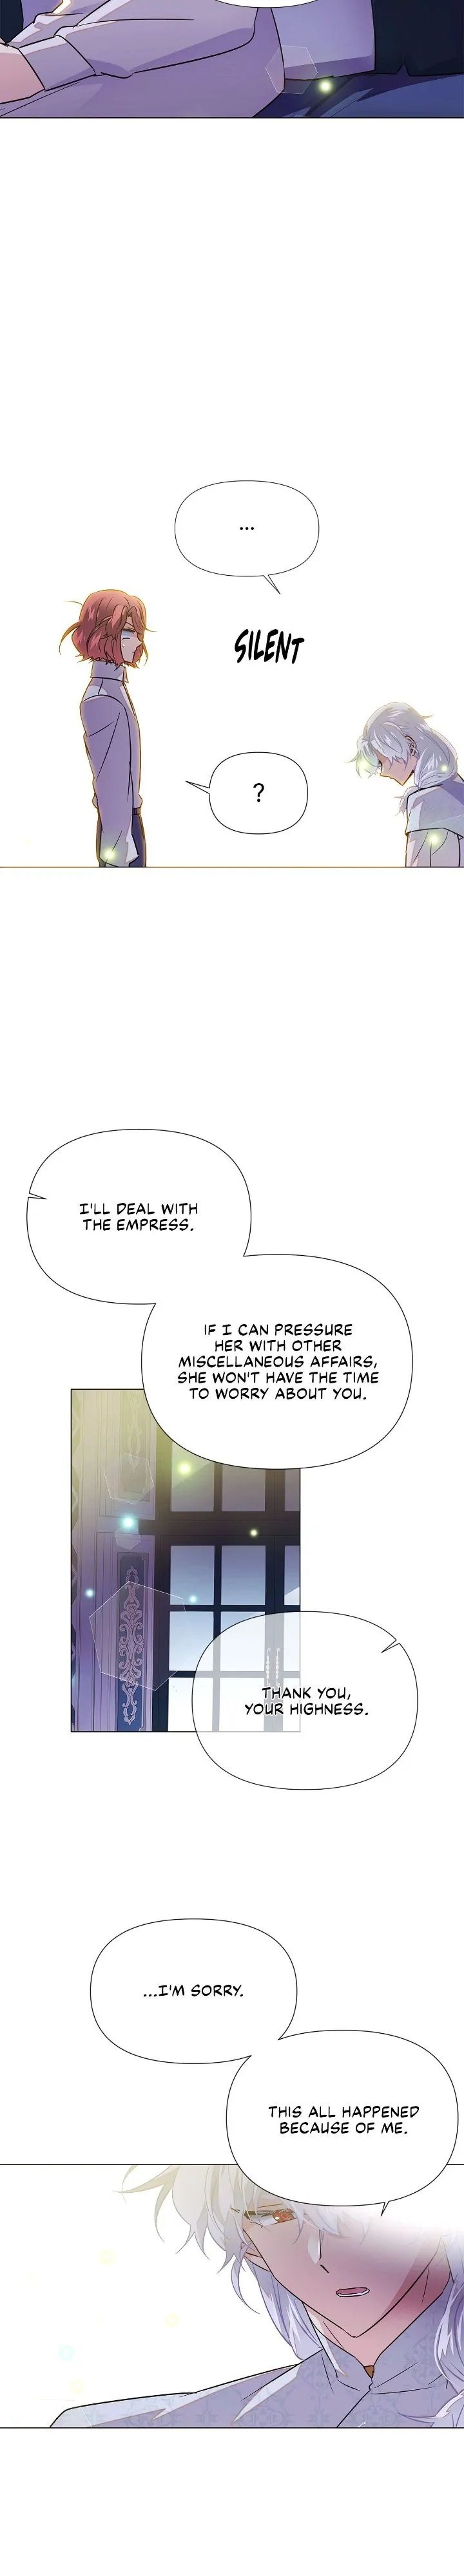 The Villain Discovered My Identity - Chapter 127 Page 24